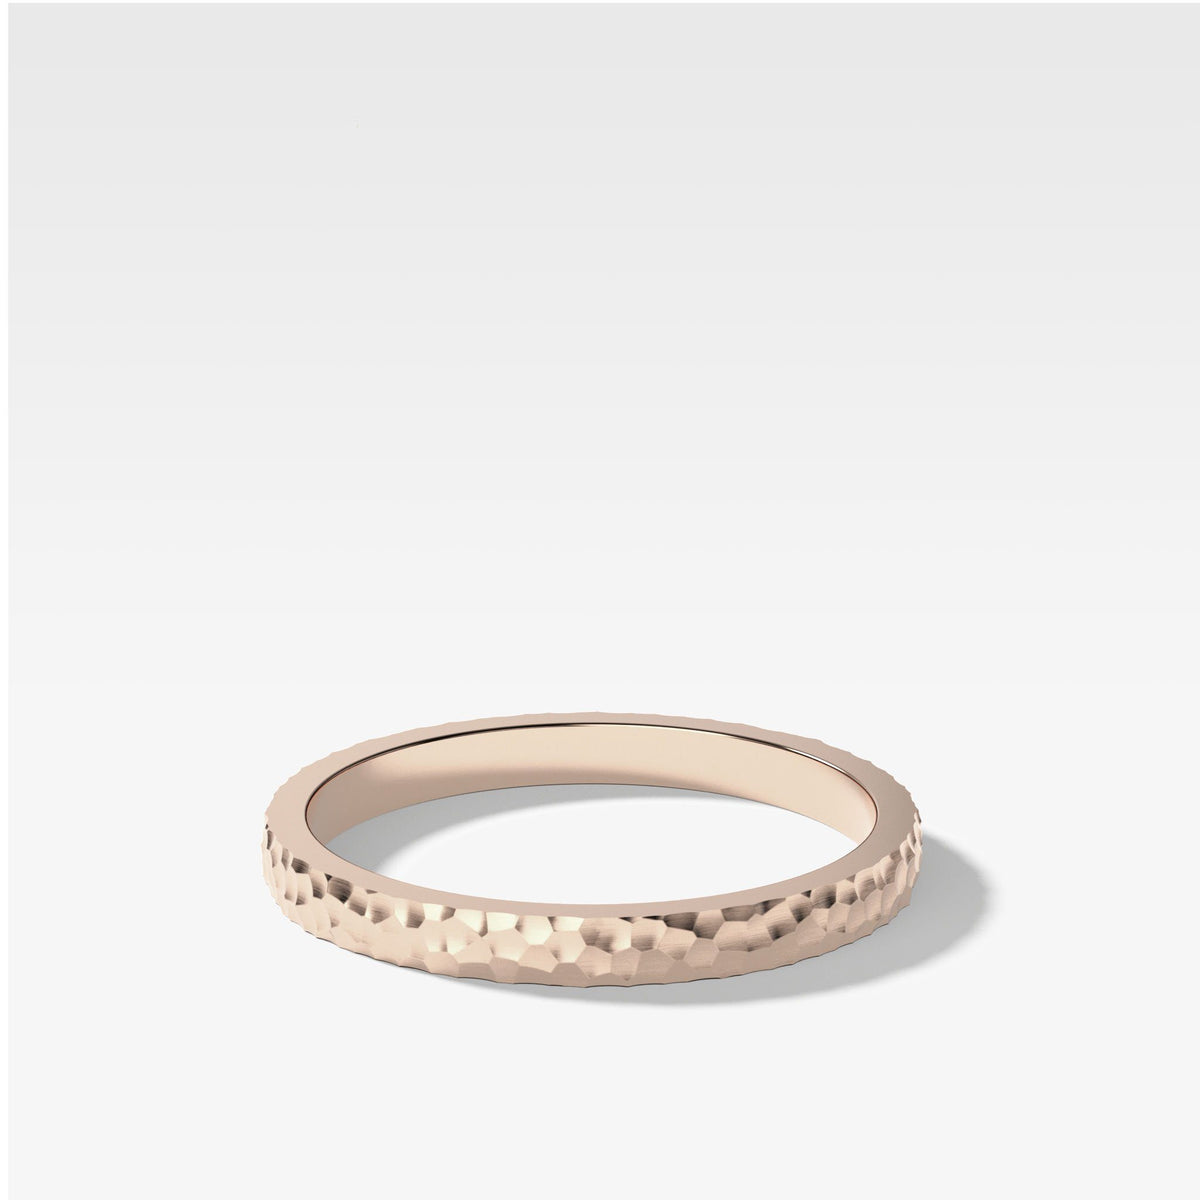 Hammered Band by Good Stone in Rose Gold